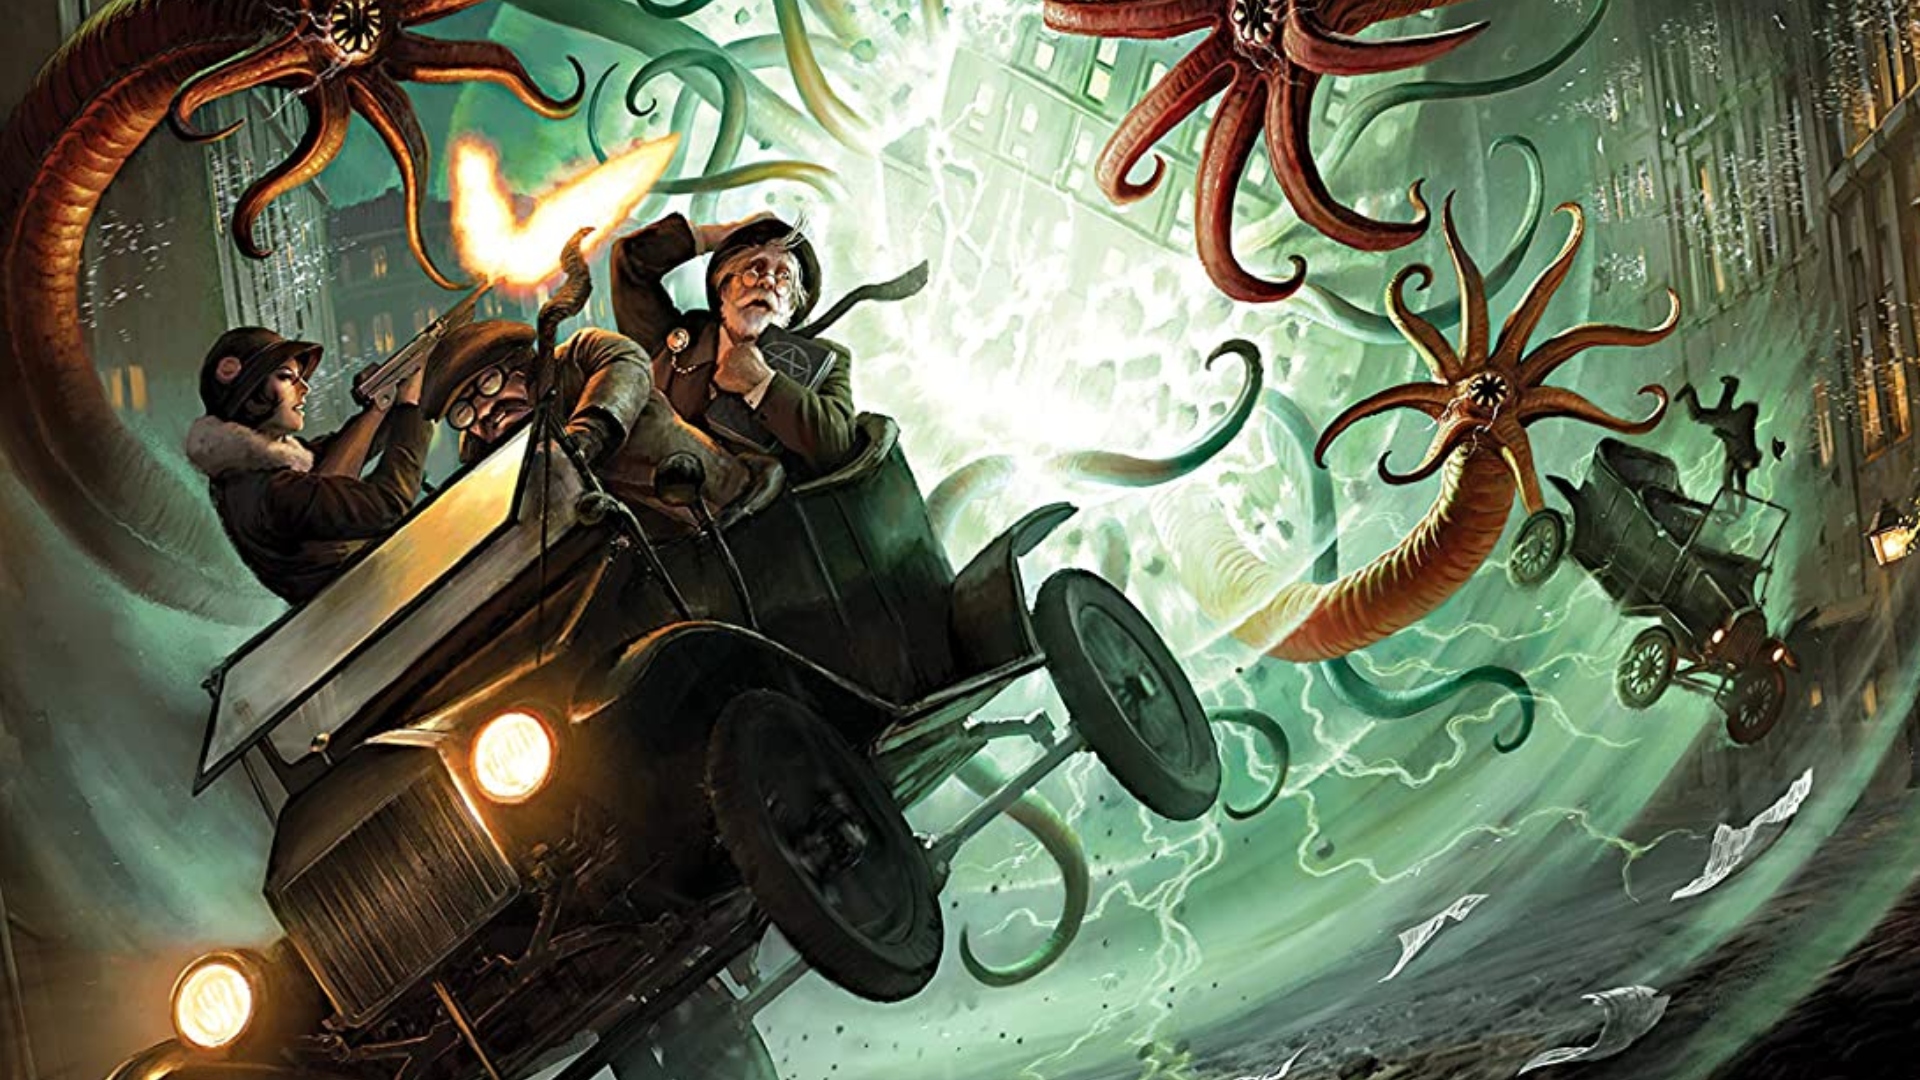 Horror board game Arkham Horror is now under $50 for Halloween